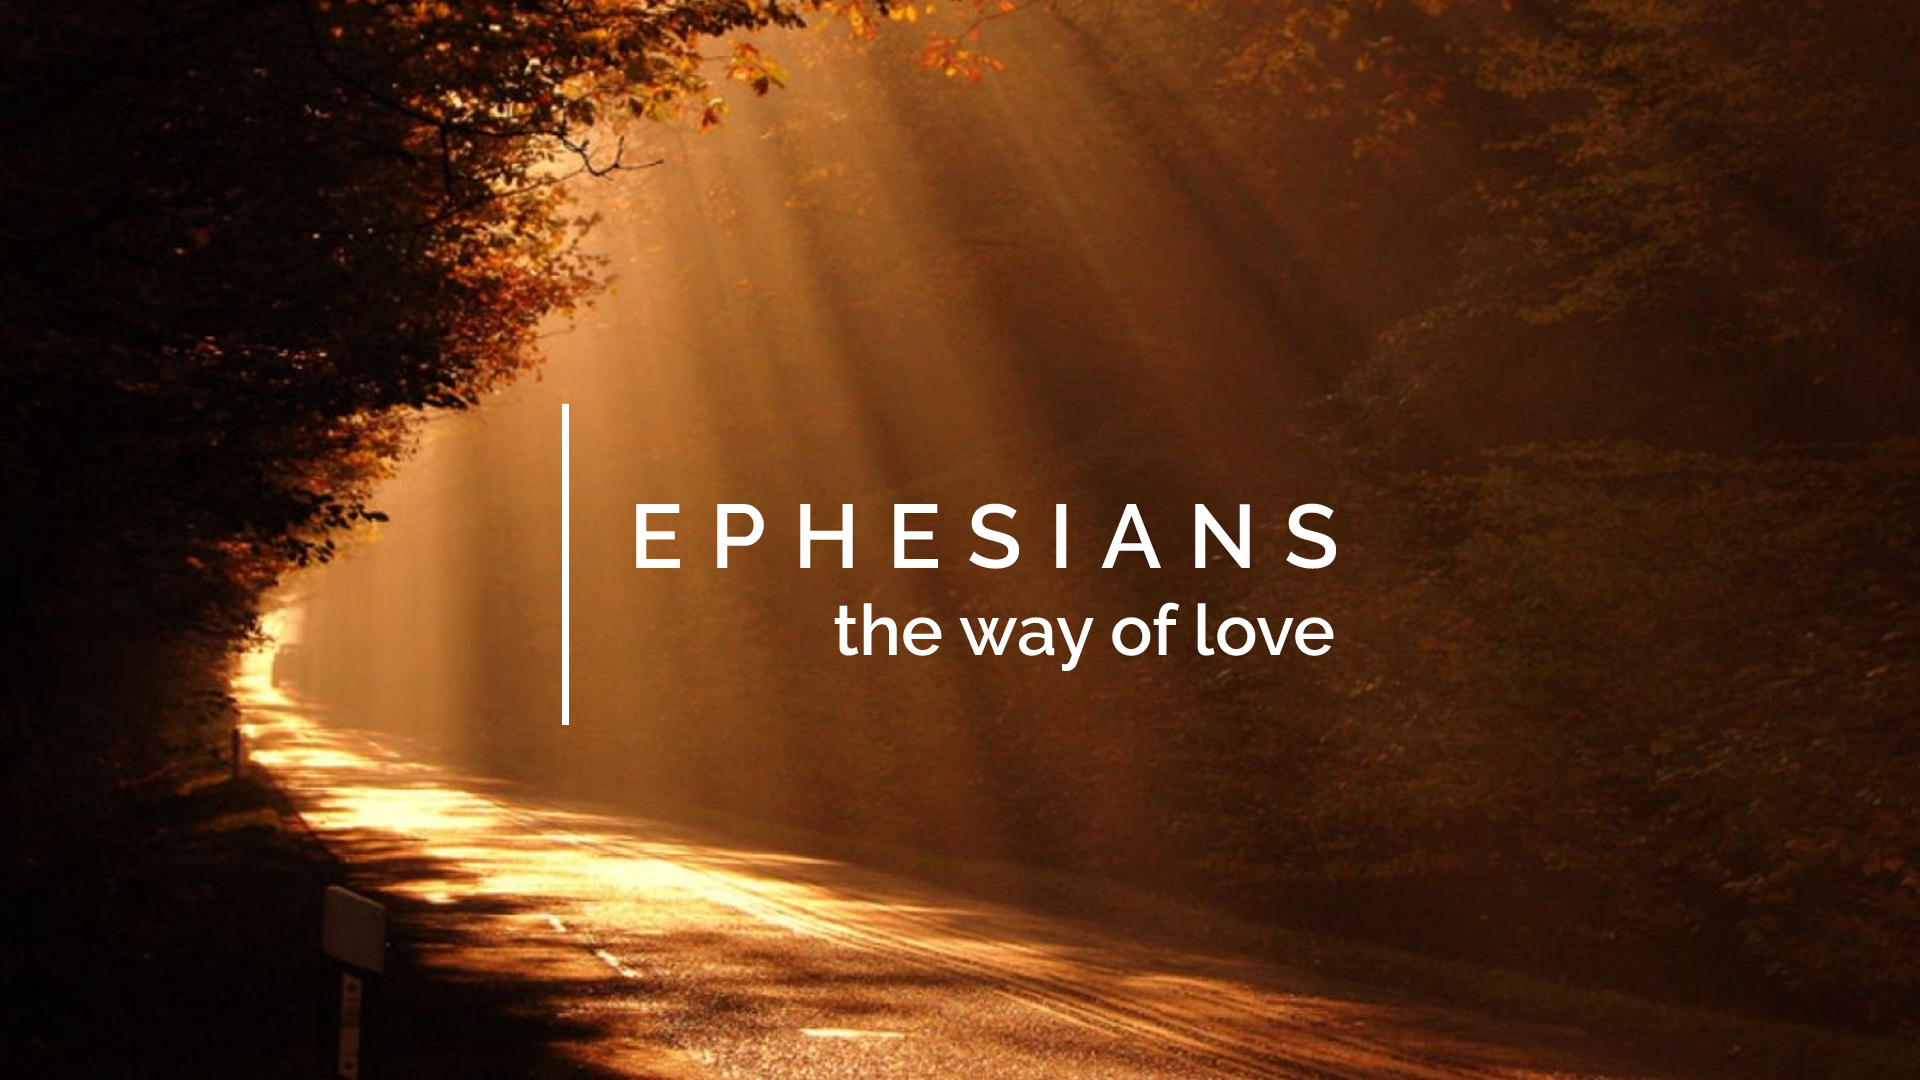 EPHESIANS | Would you please do something useful with your life?